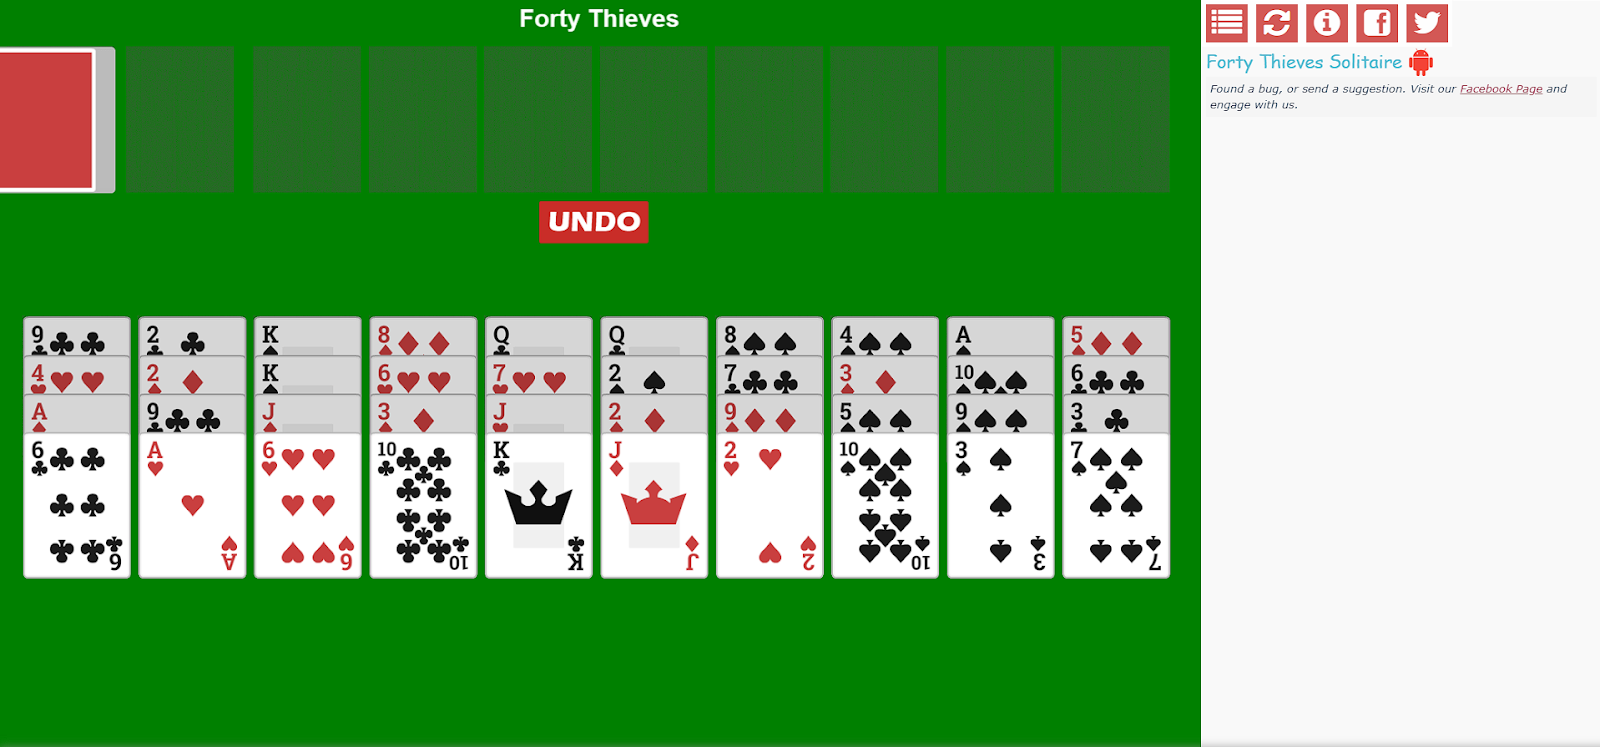 40 thieves solitaire